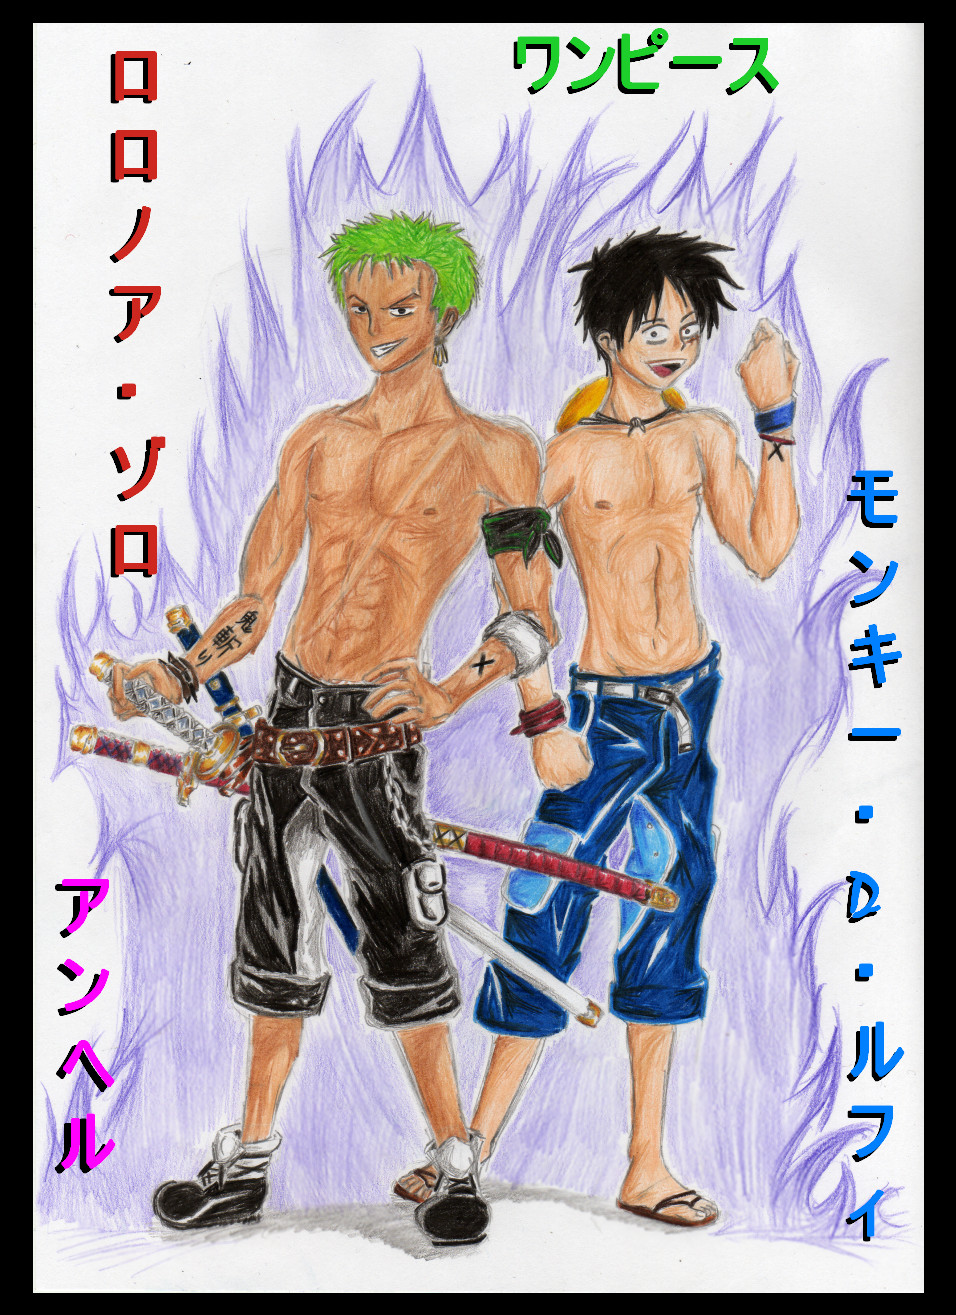 Zoro and Luffy by sword_dragon